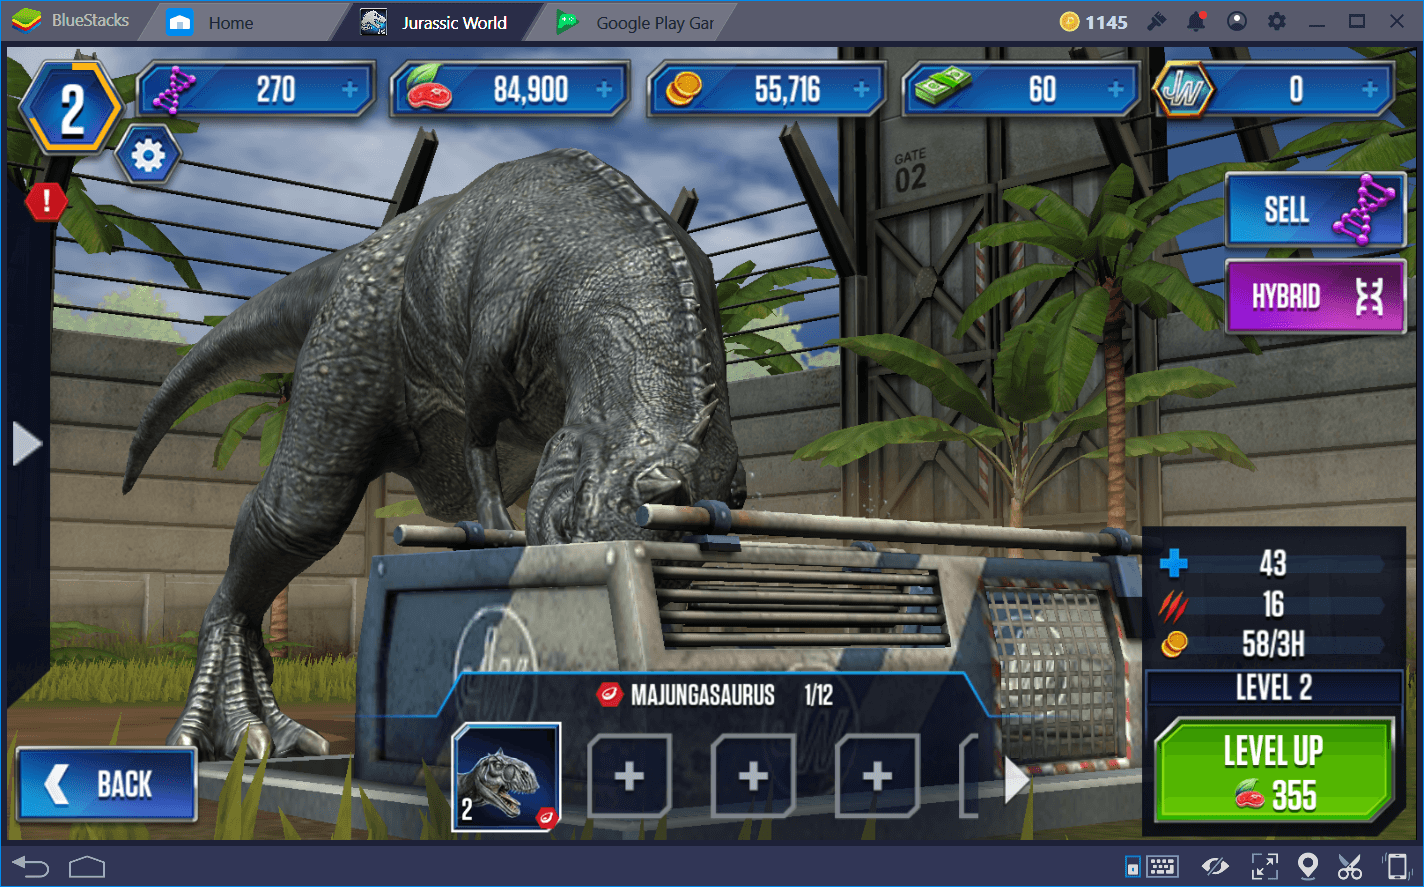 Getting Started in Jurassic World: The Game